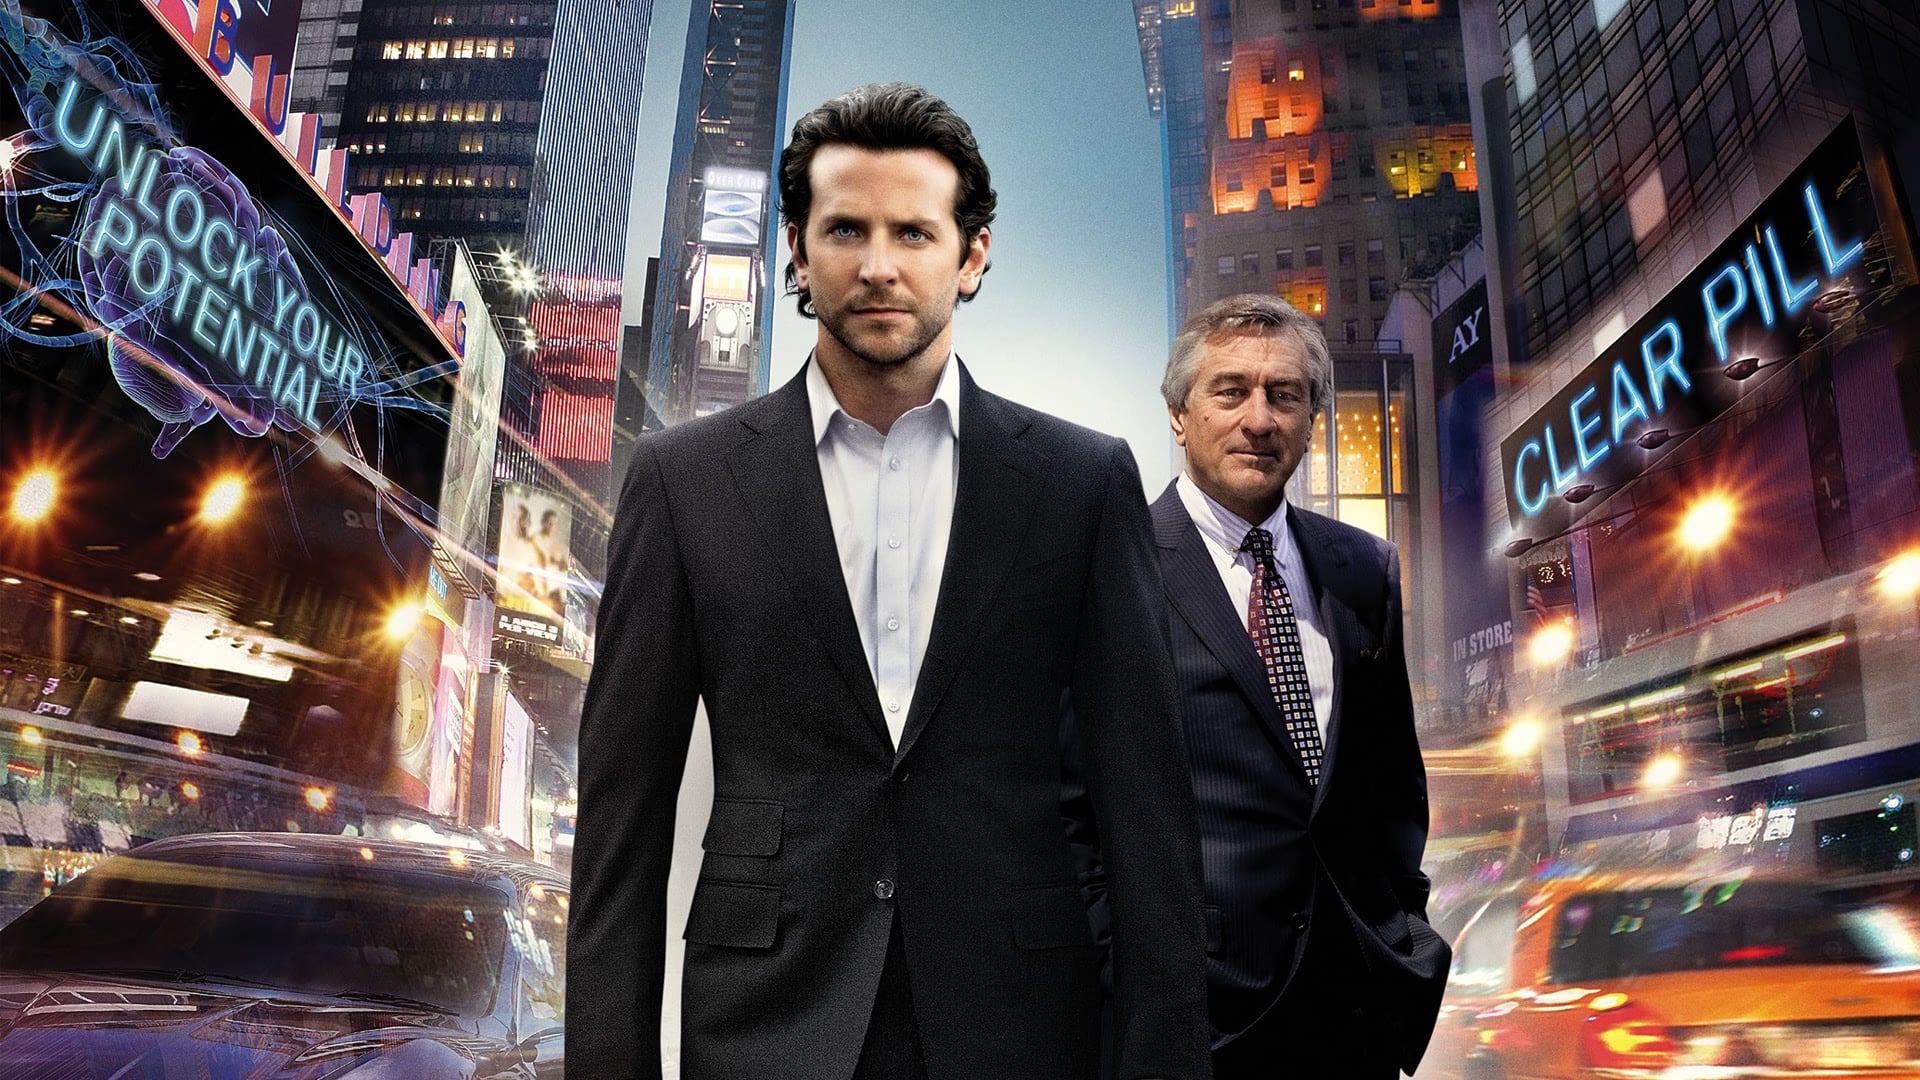 download movie limitless 2011